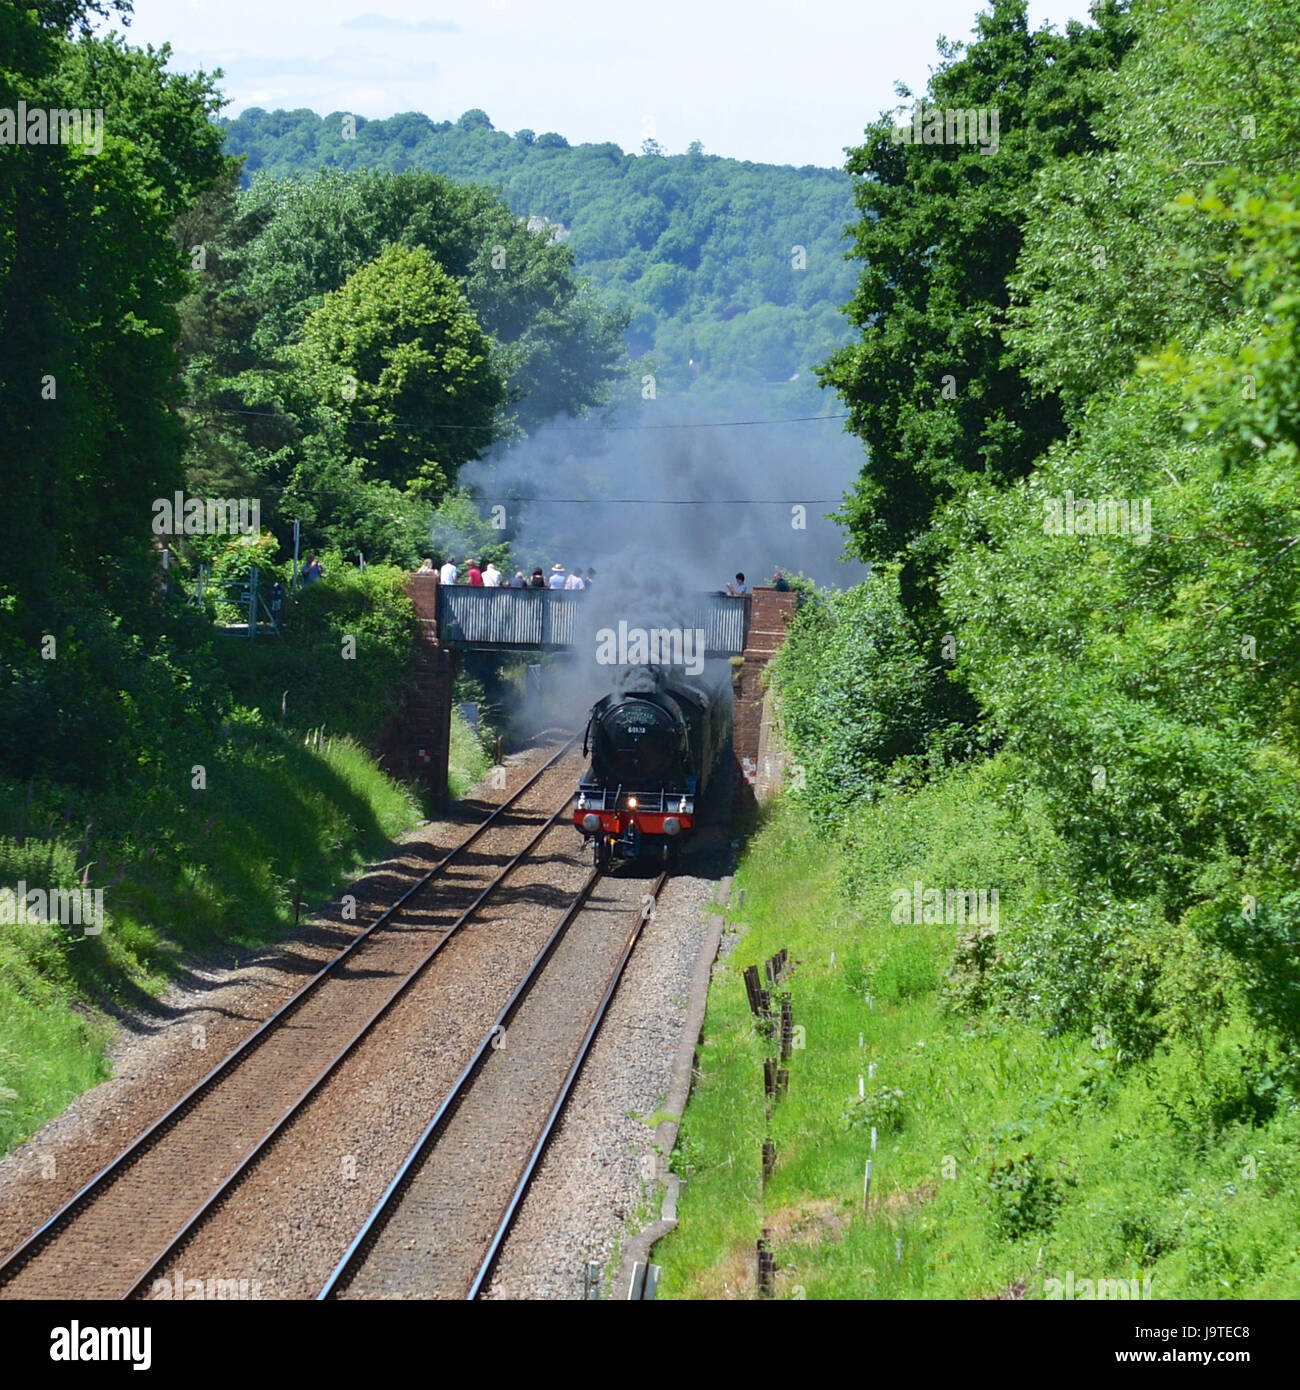 Reigate, Surrey, UK. 3rd June, 2017. Crowds flock to see the Flying Scotsman 60103 Cathedrals Express Steam Locomotive hauling pullman coaches as it speeds through Reigate in Surrey. 1304hrs Saturday 3rd June 2017. Photo ©Lindsay Constable / Alamy Live News Stock Photo